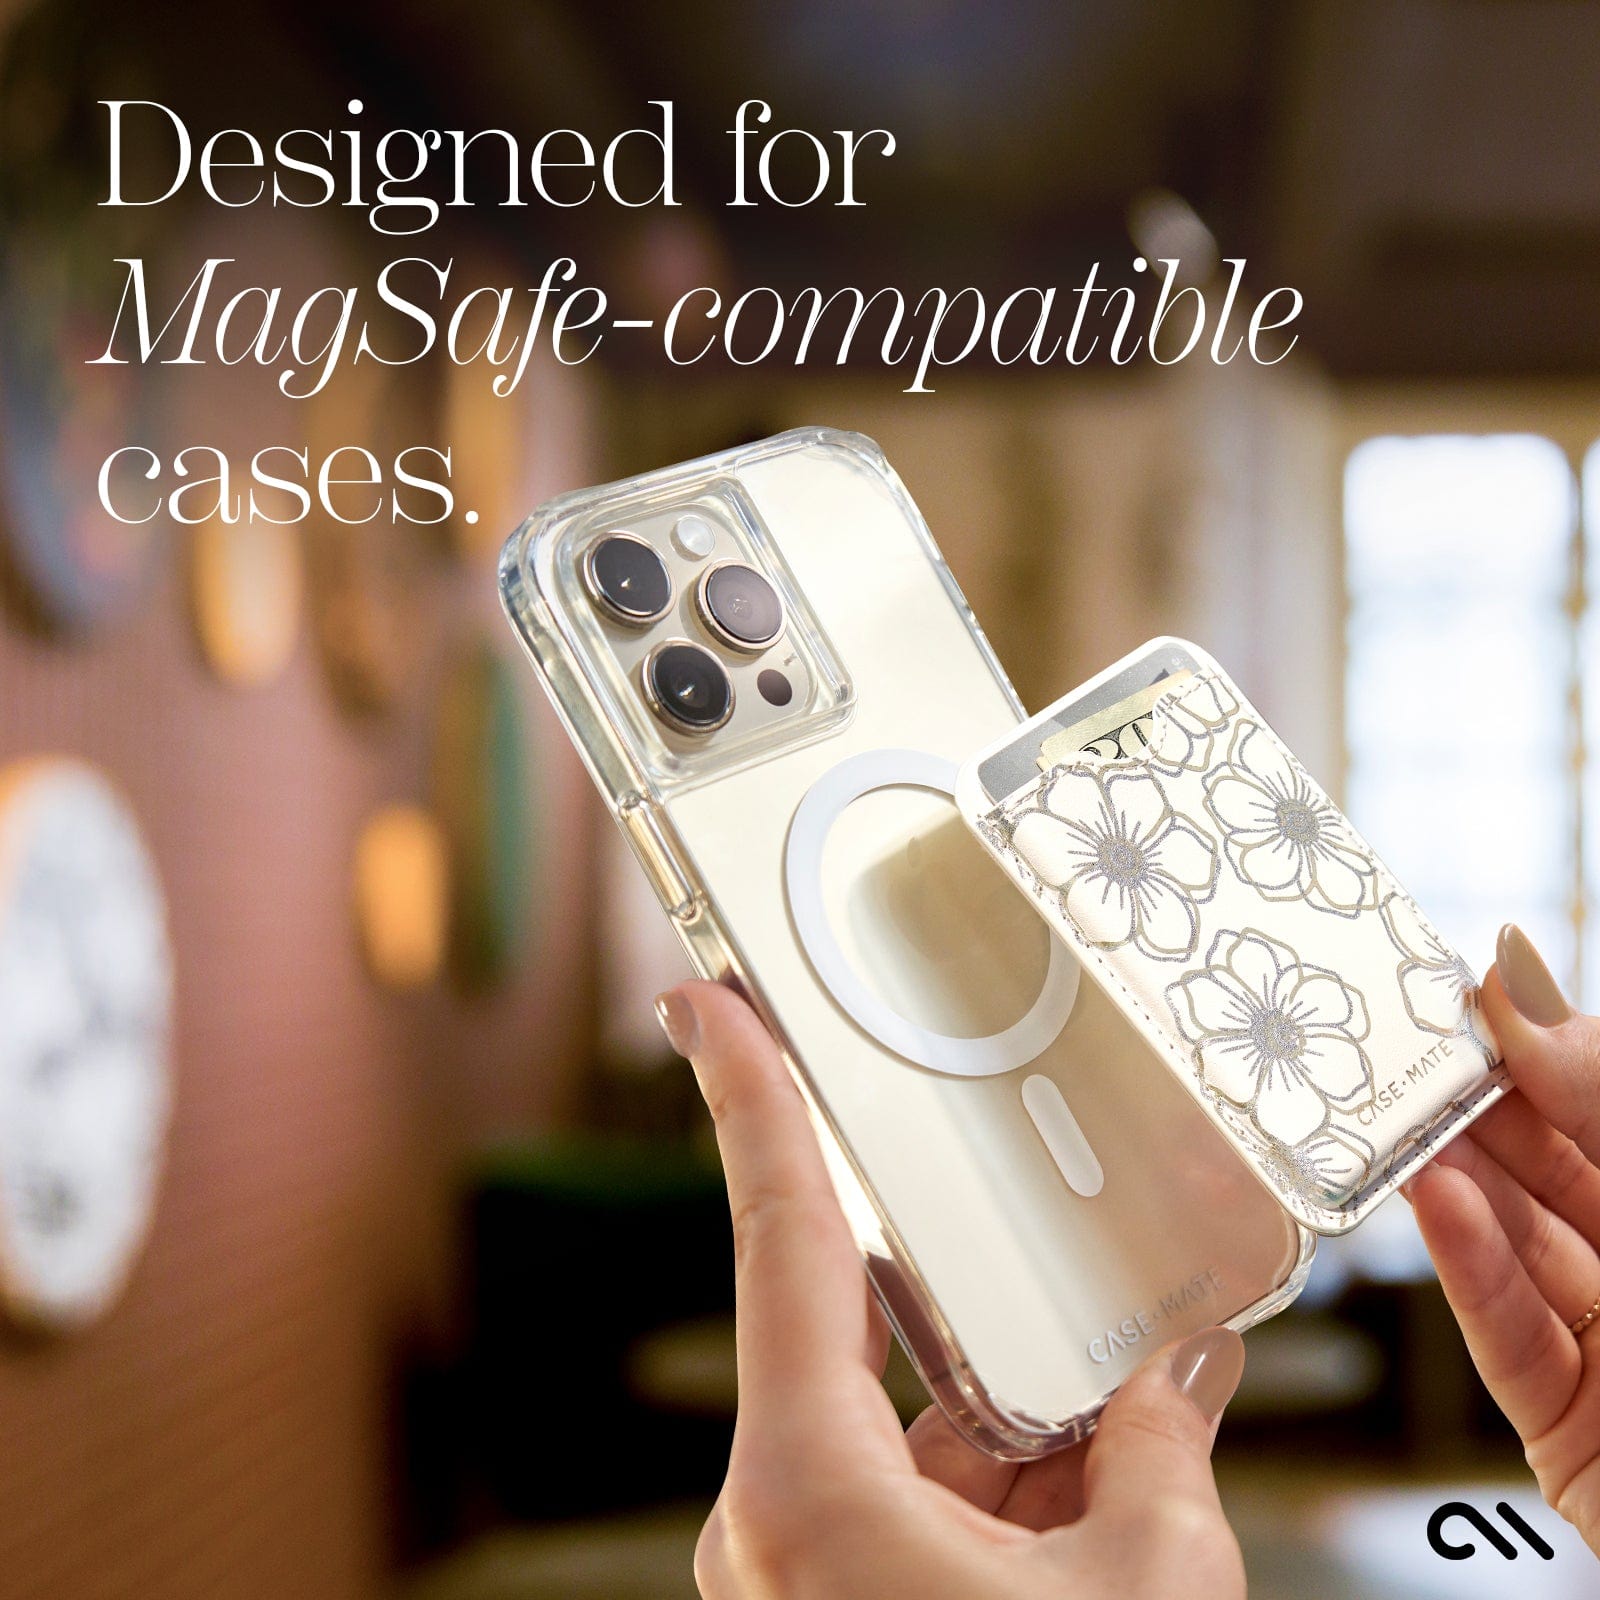 DESIGNED FOR MAGSAFE-COMPATIBLE CASES.